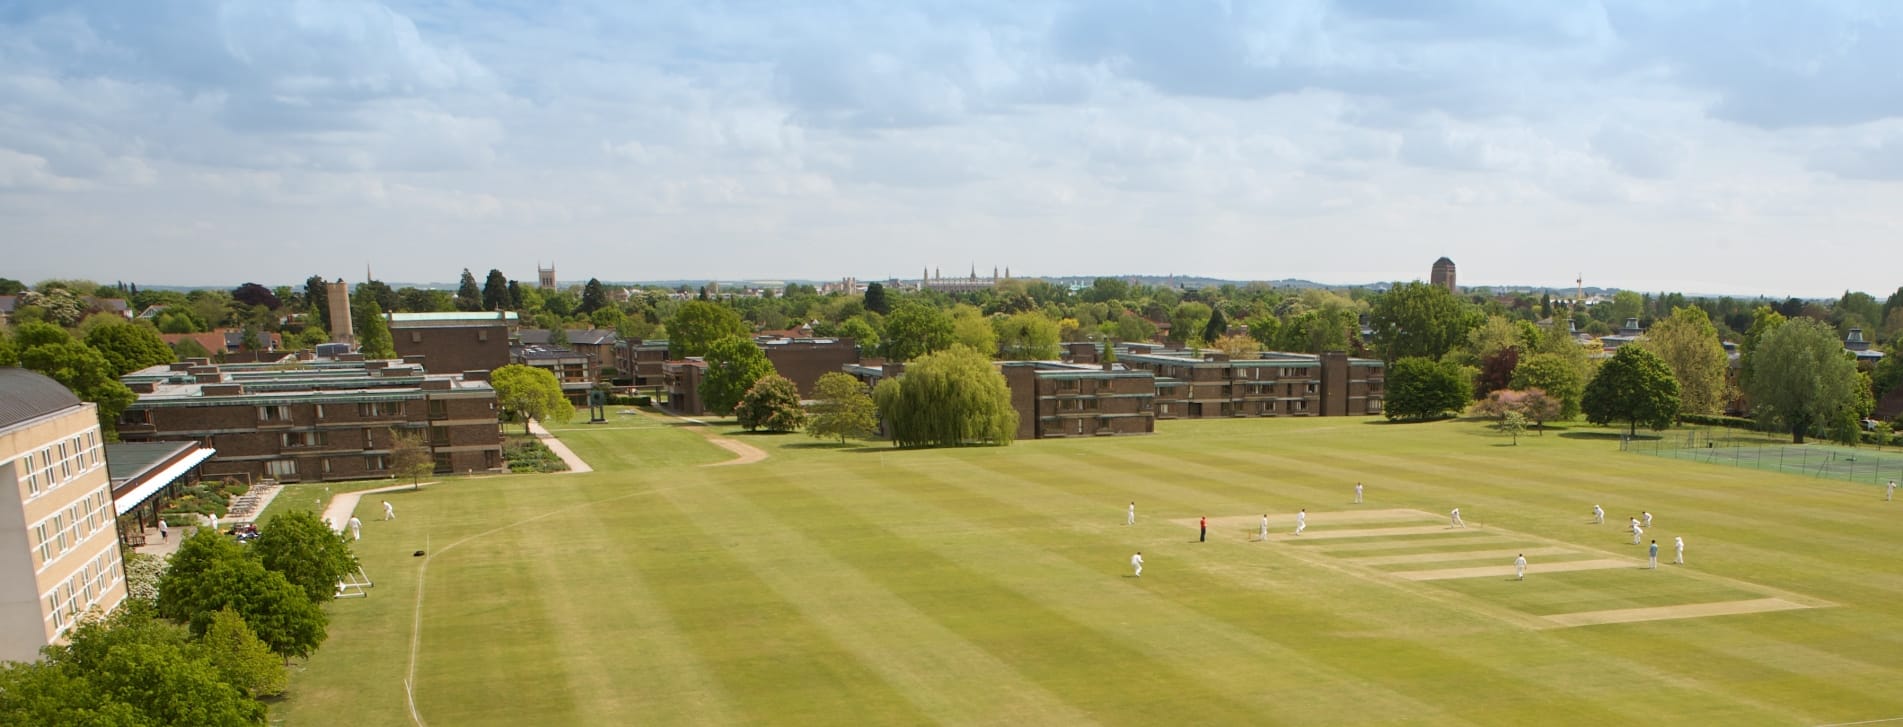 Churchill College playing fields